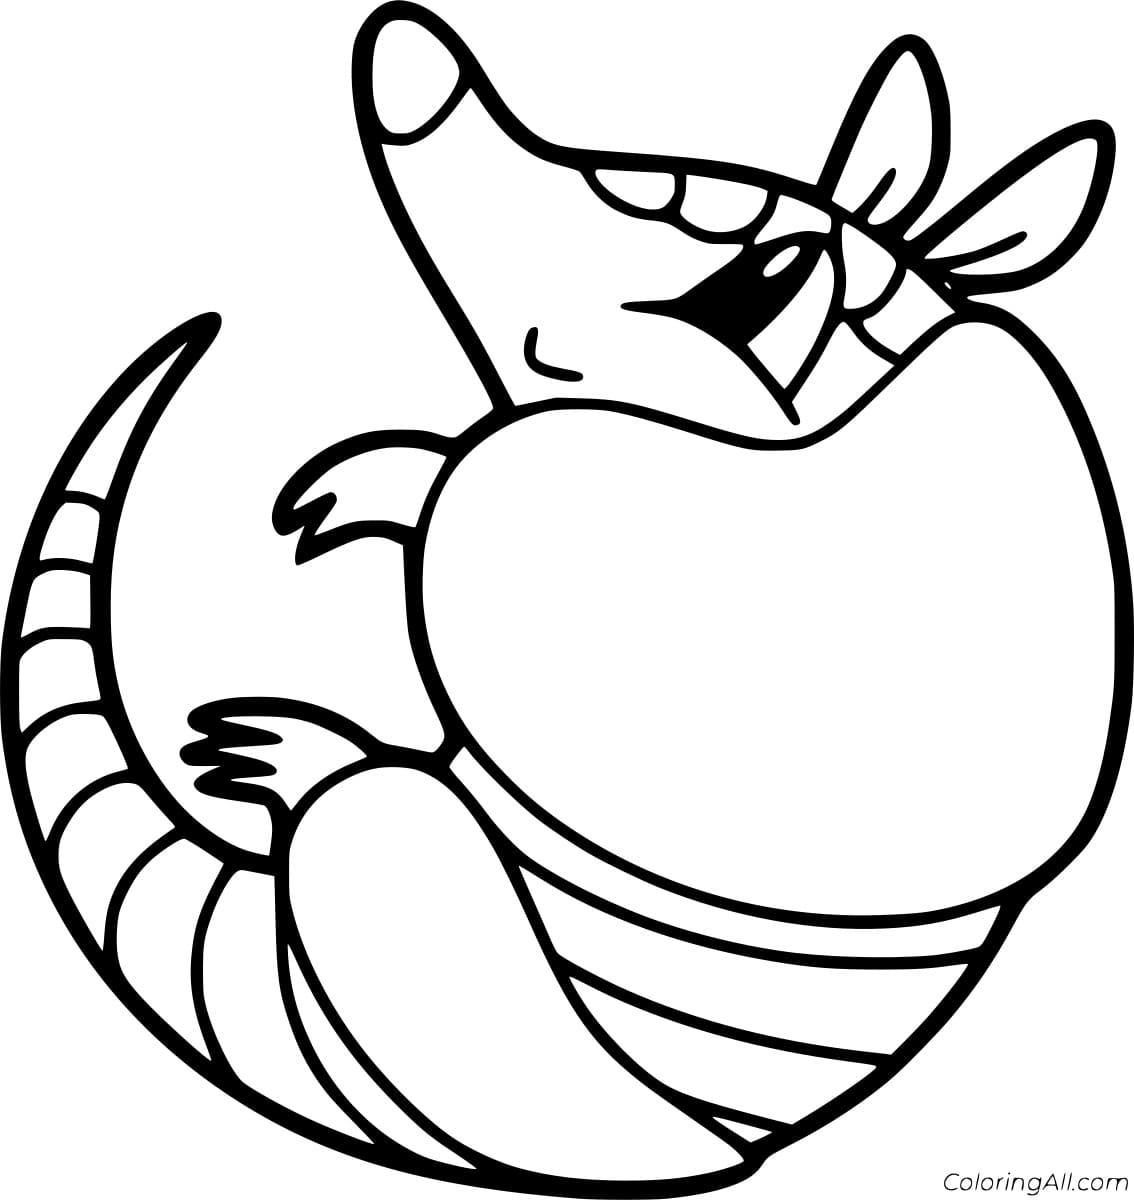 Cute Armadillo To Print Coloring Page Coloring Page